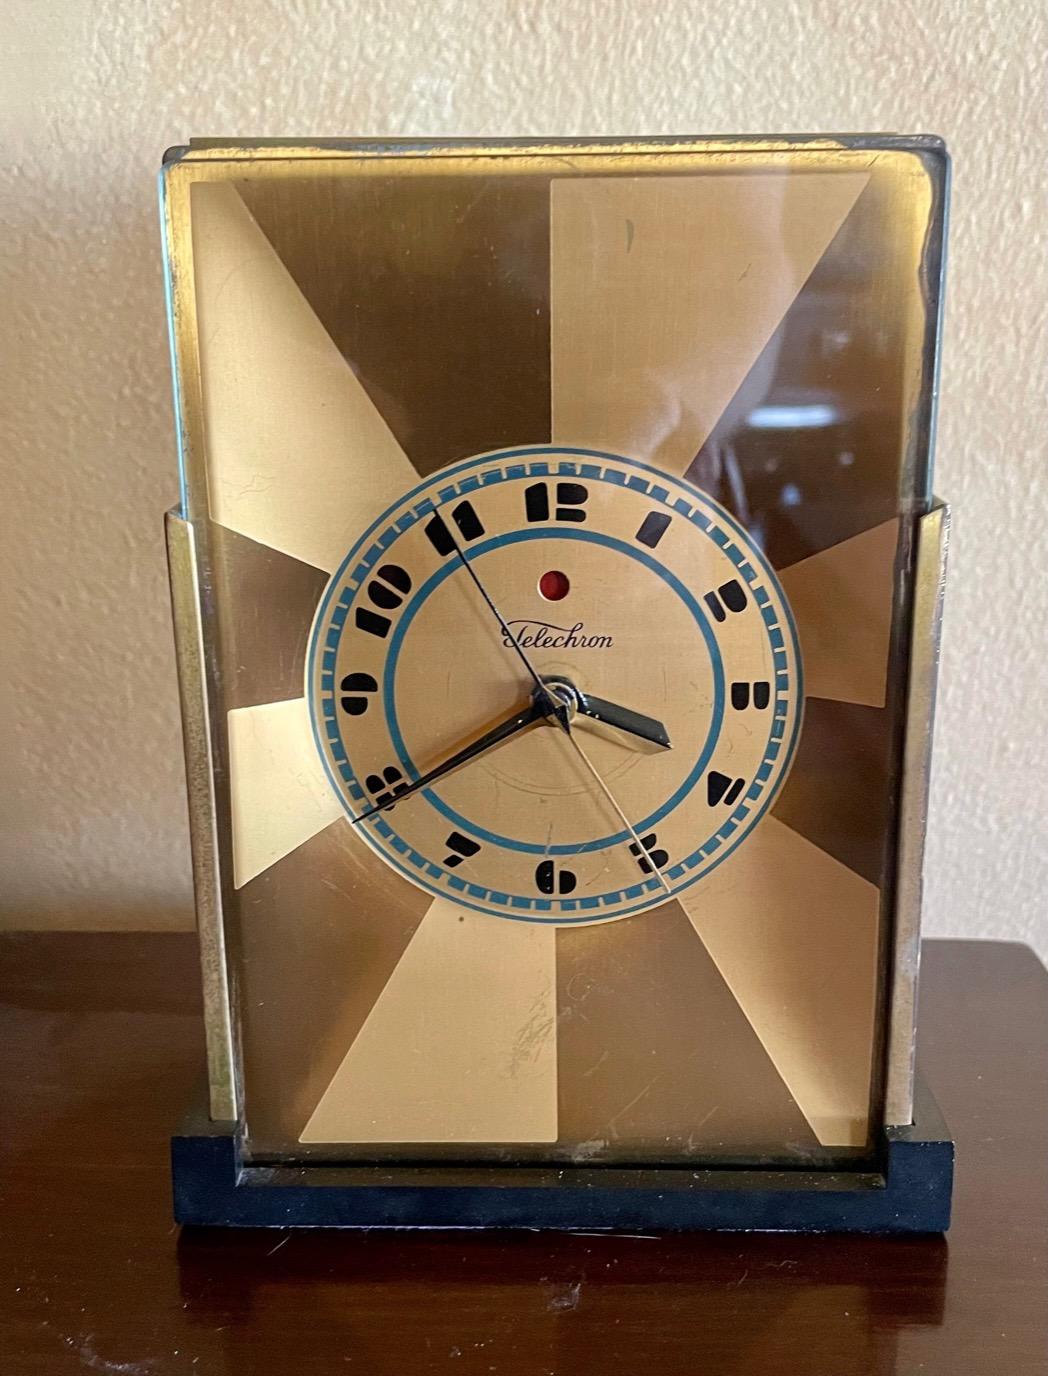 Art Deco Skyscraper Warren Telechron Clock 431Modernique by Paul Frankl, 1928. This very rare two-tone gold model with a bakelite base and rear panel includes a blue chapter ring dial with a black logo and numbers. The standard M1 rotor movement